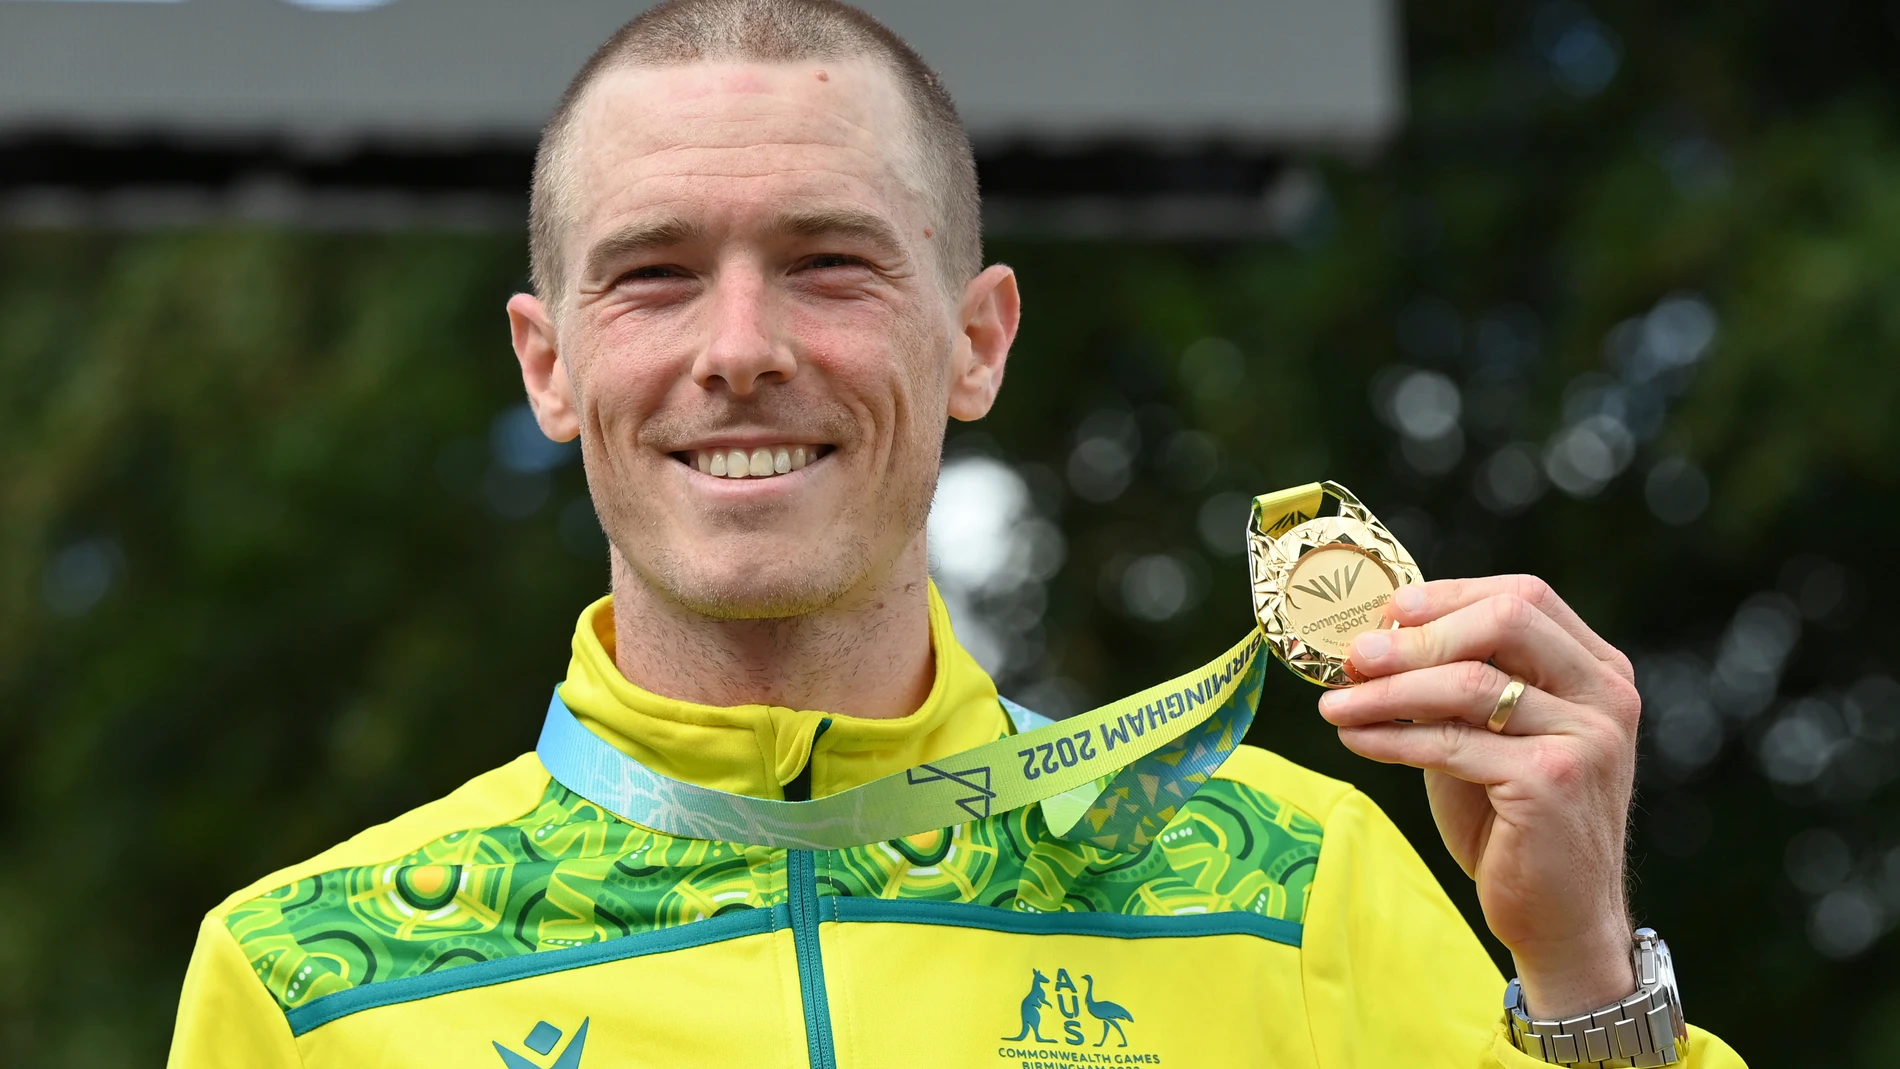 FILE - Gold medal winner Rohan Dennis of Australia poses with his medal after the men's cycling individual time trials at the Commonwealth Games in West Park, Wolverhampton, England, on Aug. 4, 2022. Dennis was reported to have been charged in connection with the death of his wife, Olympic cyclist Melissa Hoskins, who died after being struck by a vehicle while riding in Adelaide. (AP Photo/Rui Vieira, File)